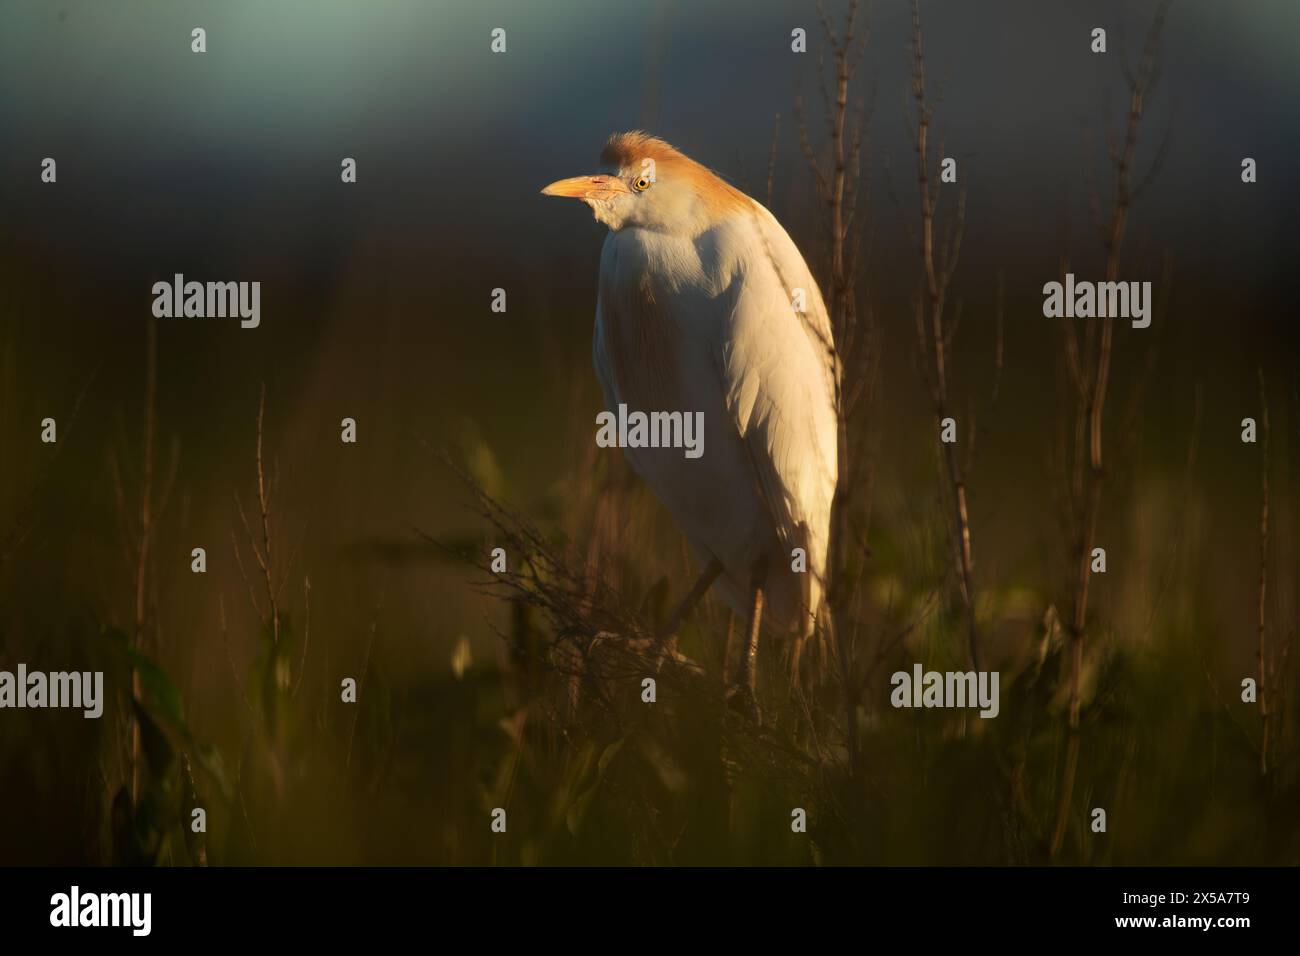 A tranquil cattle egret stands amidst grass, captured in the soft, warm light of dusk Stock Photo